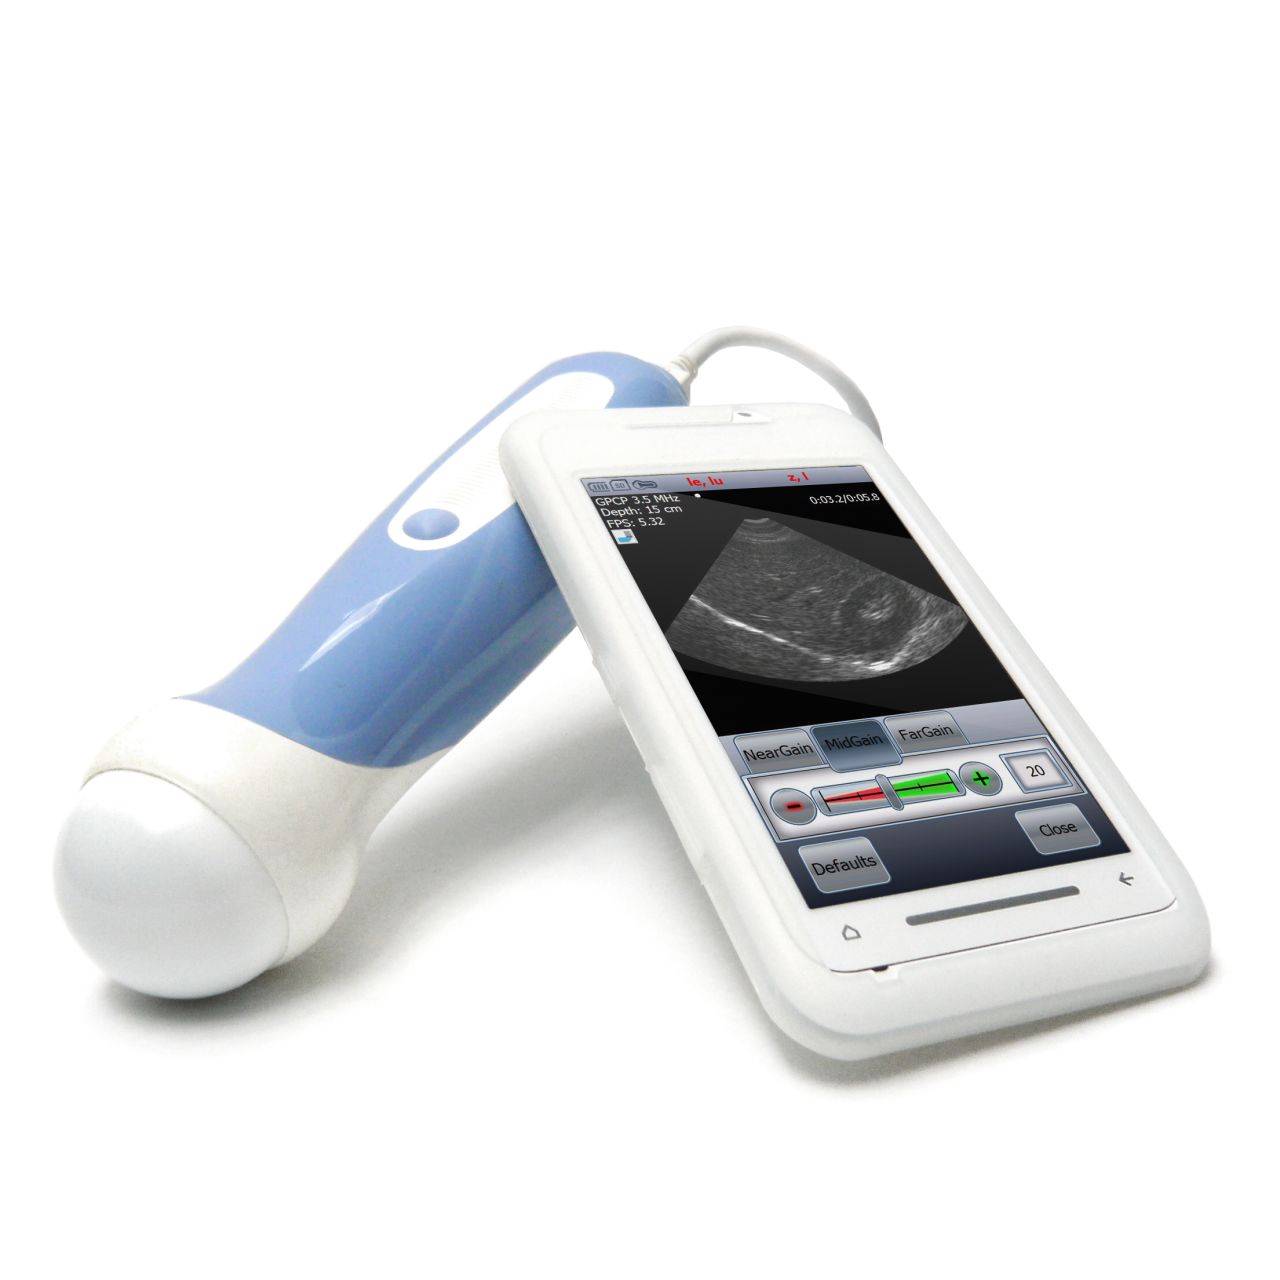 But it's not the only phone tapping into the health market. The Mobisante MobiUS SP1 smartphone ultrasound system has the potential to bring ultrasound technology to remote rural areas.